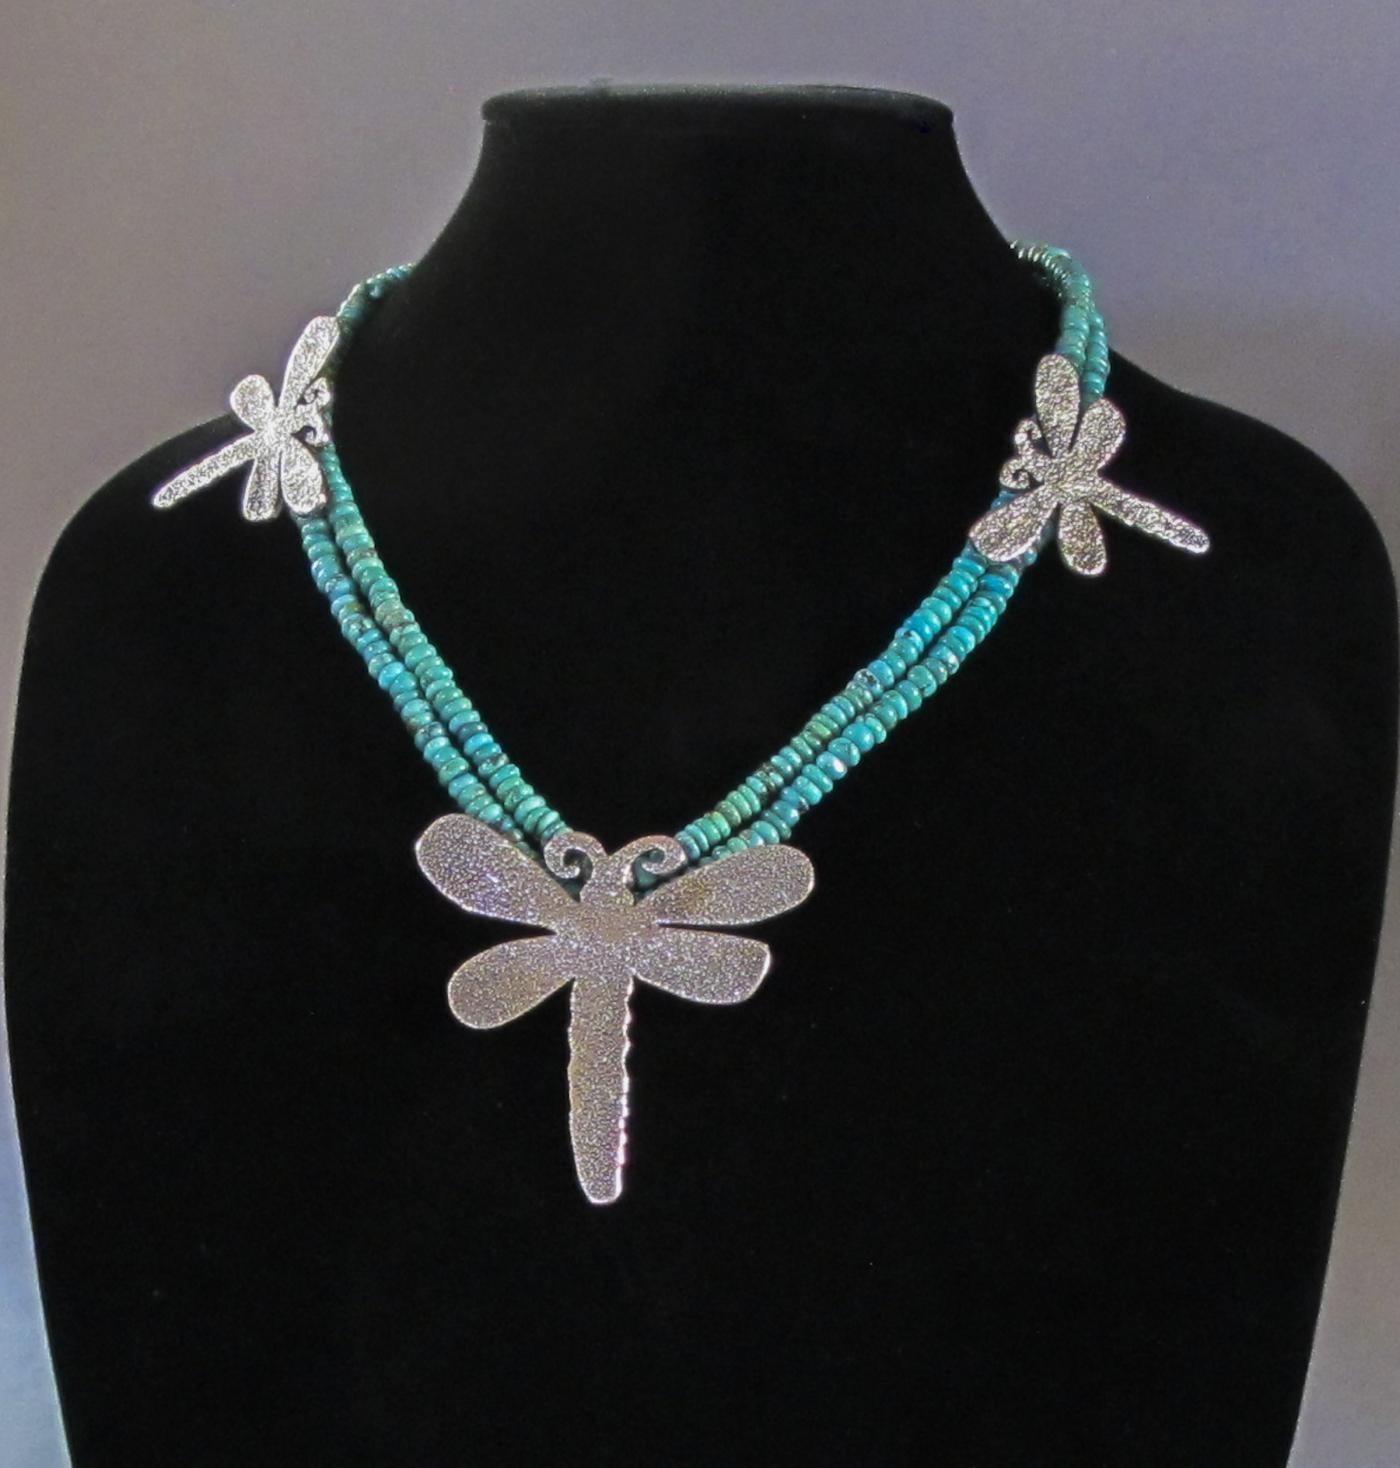 Dragonfly necklace, cast silver Kingman turquoise beads Melanie Yazzie Navajo


Melanie A. Yazzie (Navajo-Diné) is a highly regarded multimedia artist known for her printmaking, paintings, sculpture, and jewelry designs.  

She has exhibited,